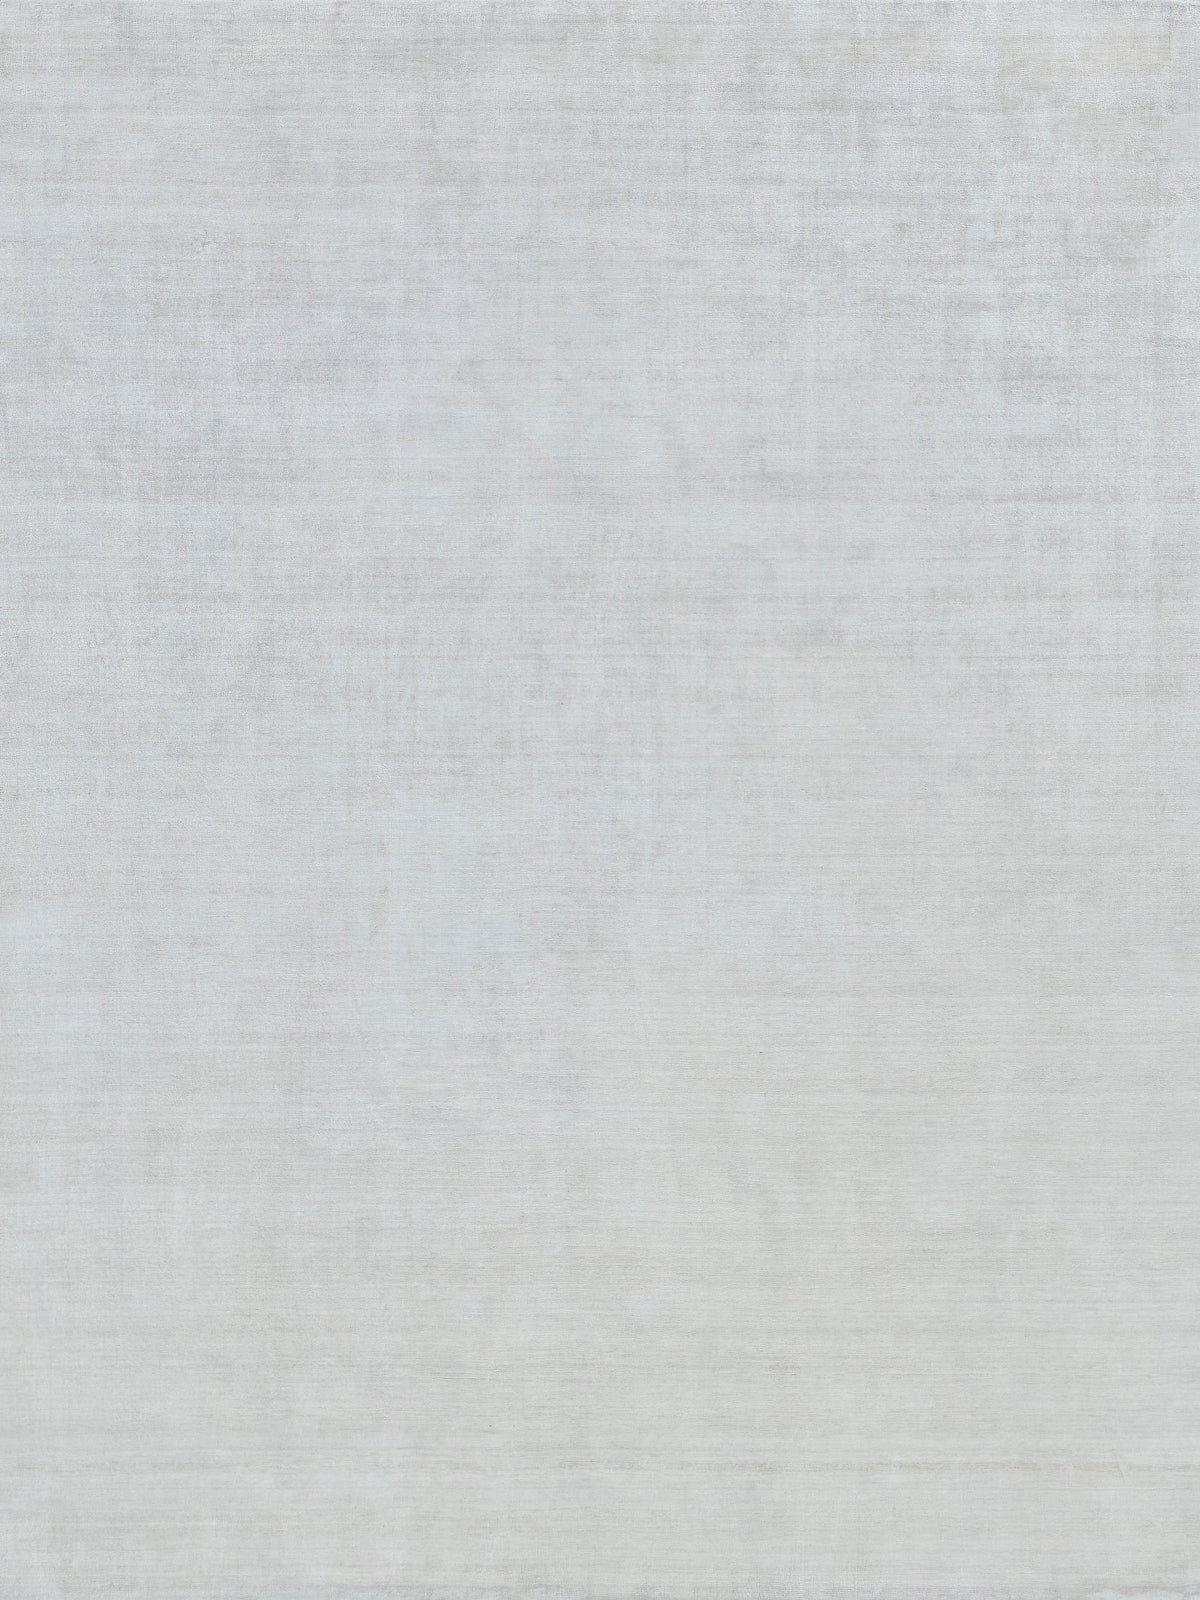 Exquisite Rugs Purity 9913 Ivory Area Rug